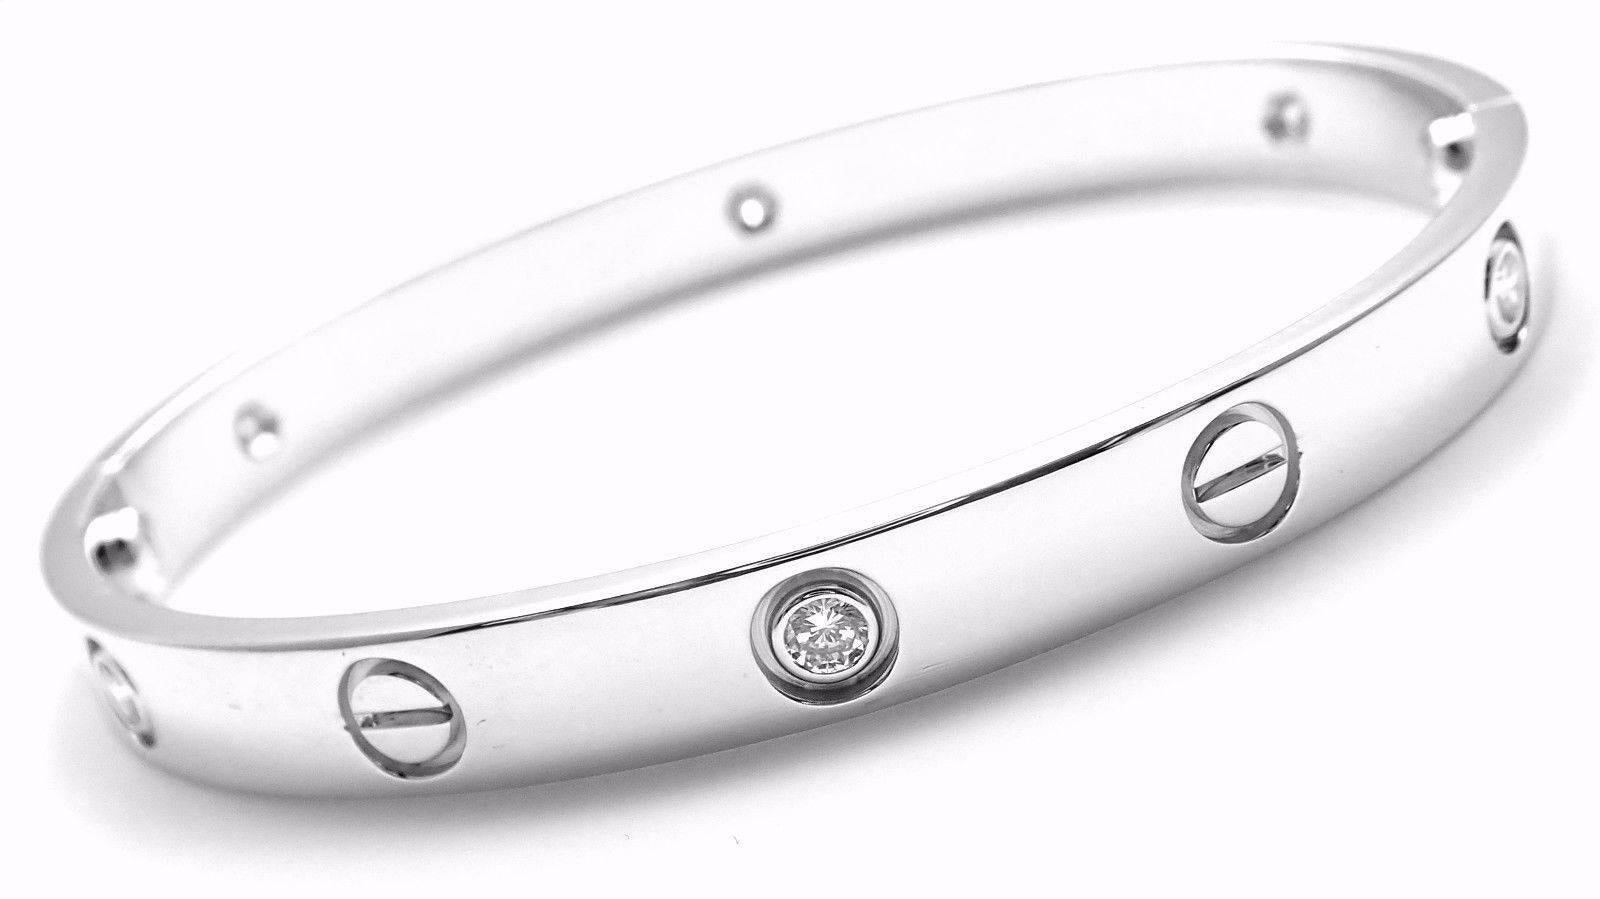 18k White Gold Cartier LOVE Bangle Bracelet, size 17.
With 6 brilliant round cut diamonds, VS1 clarity, E-F color total weight approx. .30ct
This bracelet comes with a Cartier box, screwdriver and service paper from Cartier store in